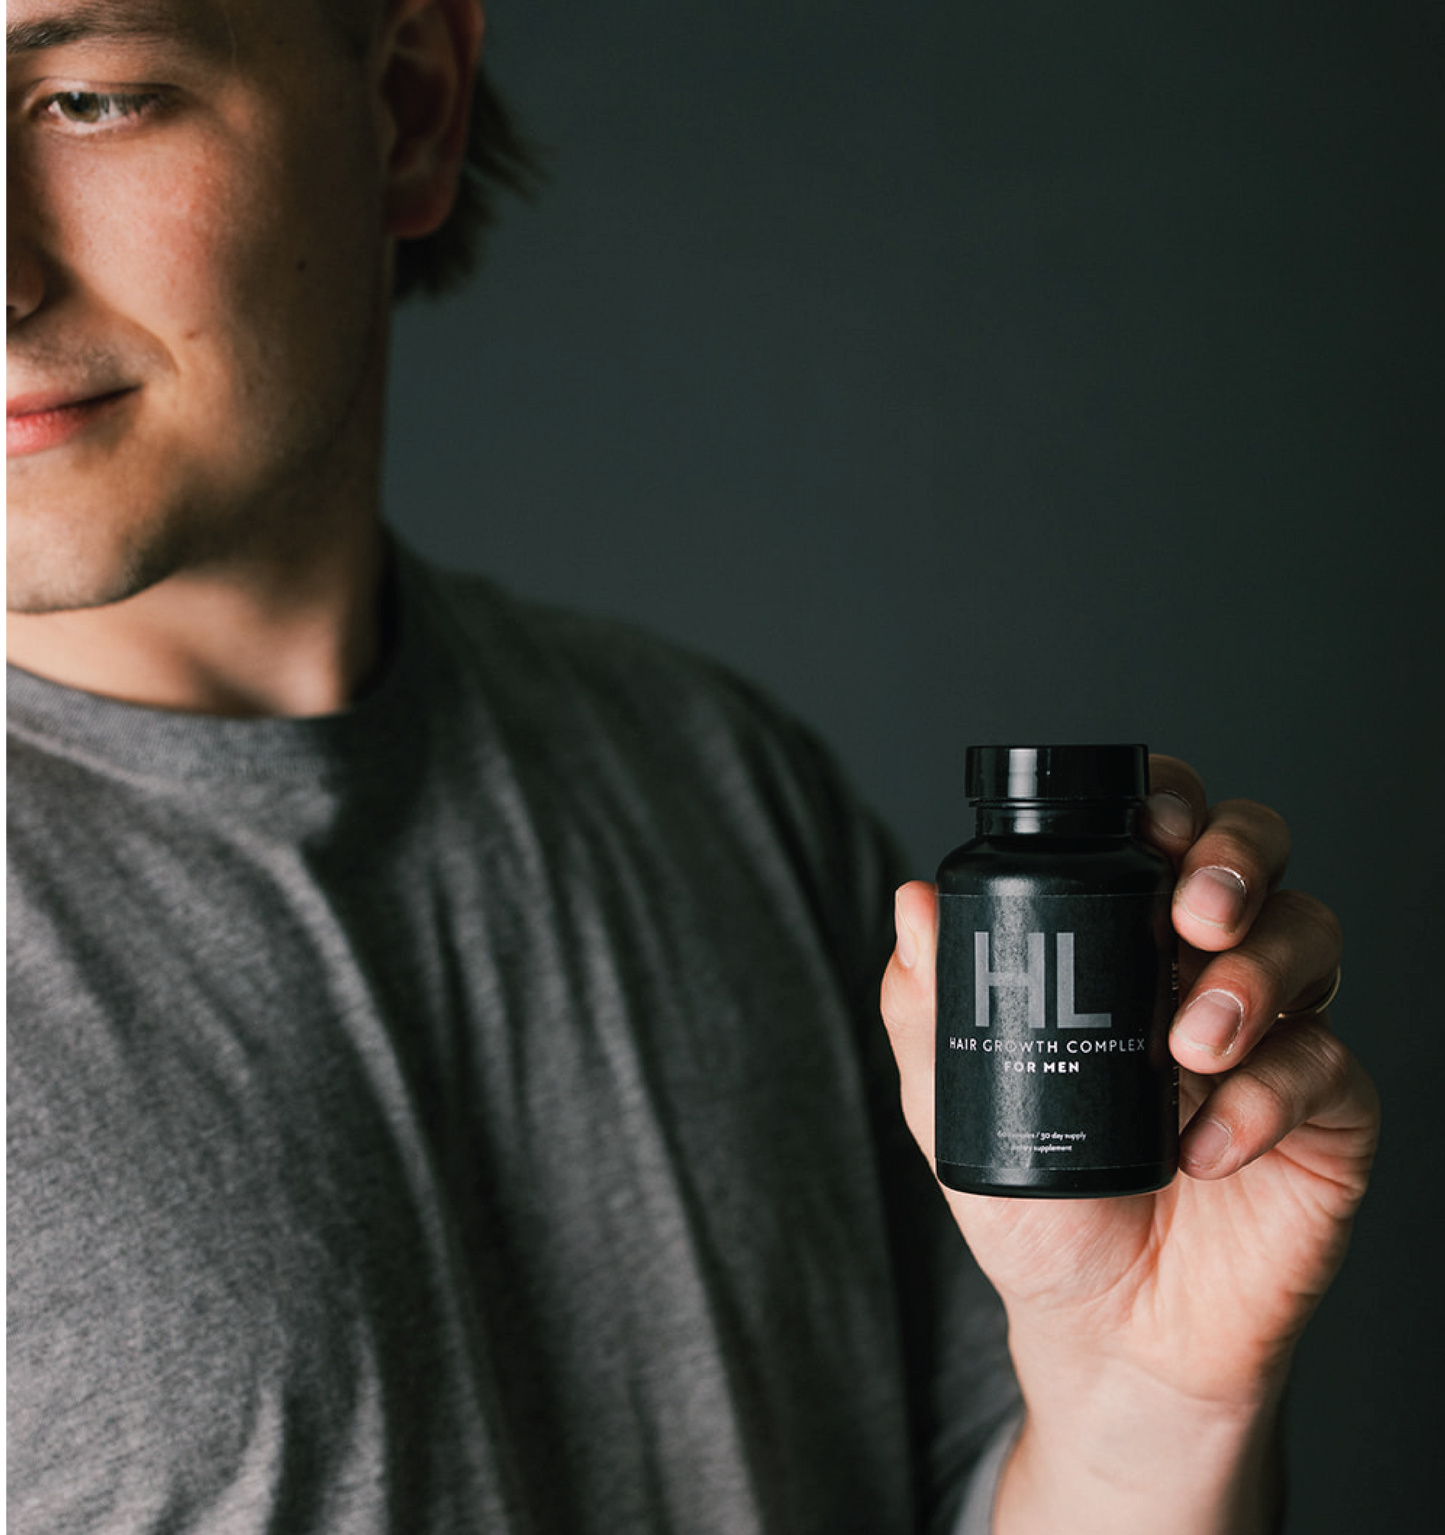 Man holding Black bottle of HAIRLOVE hair growth complex for men, daily hair vitamin with a soft smile